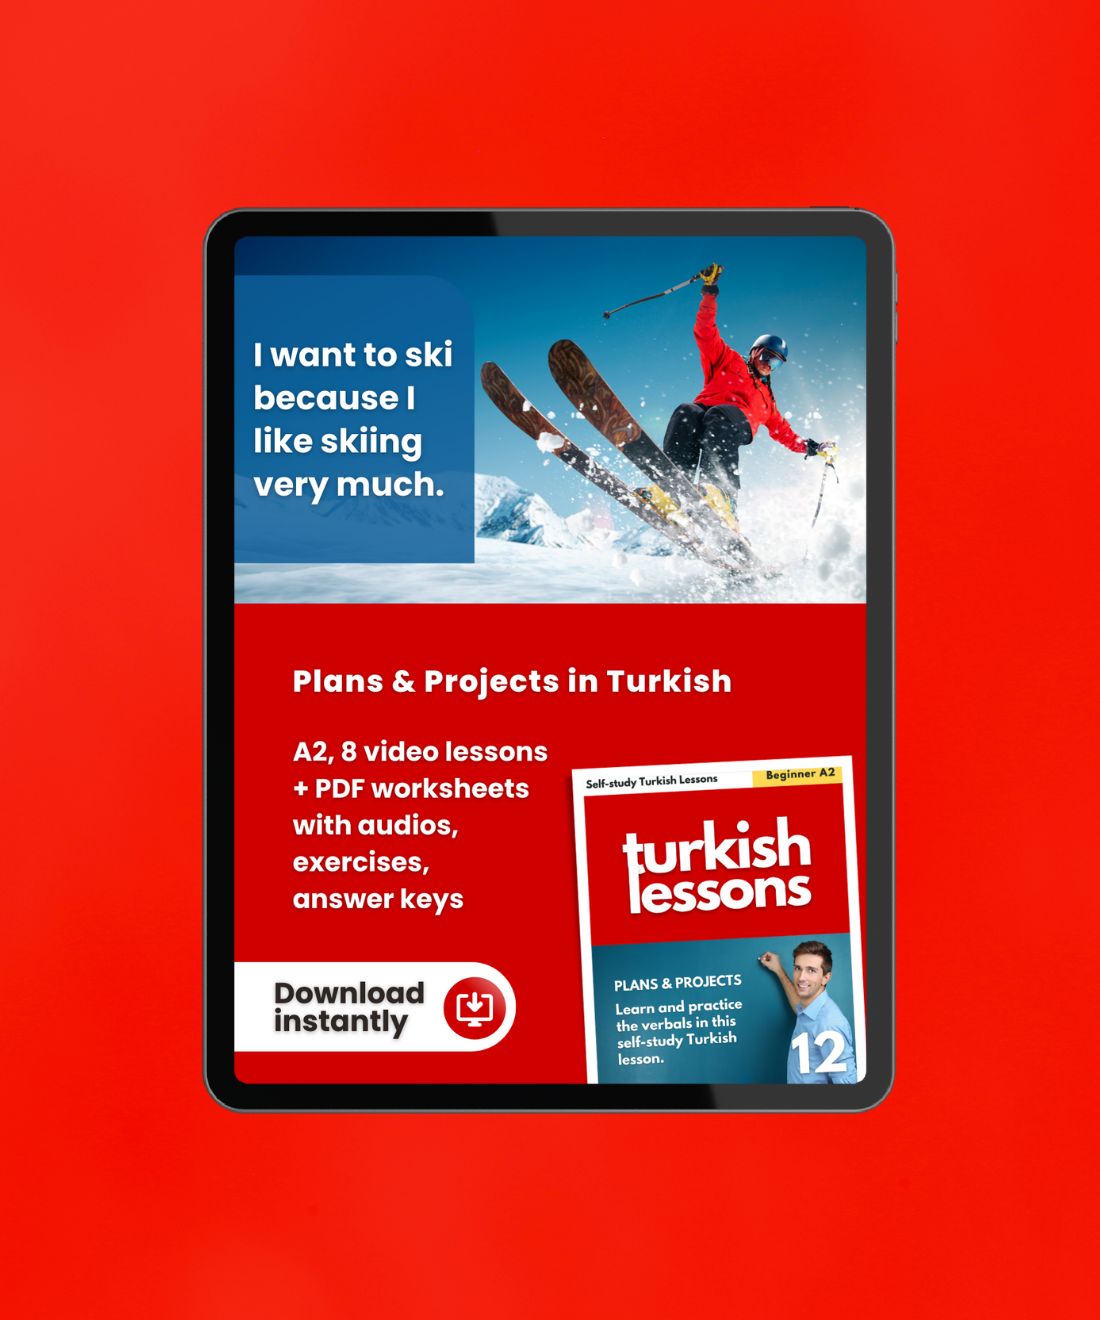 turkish lessons a2 - plans in turkish language